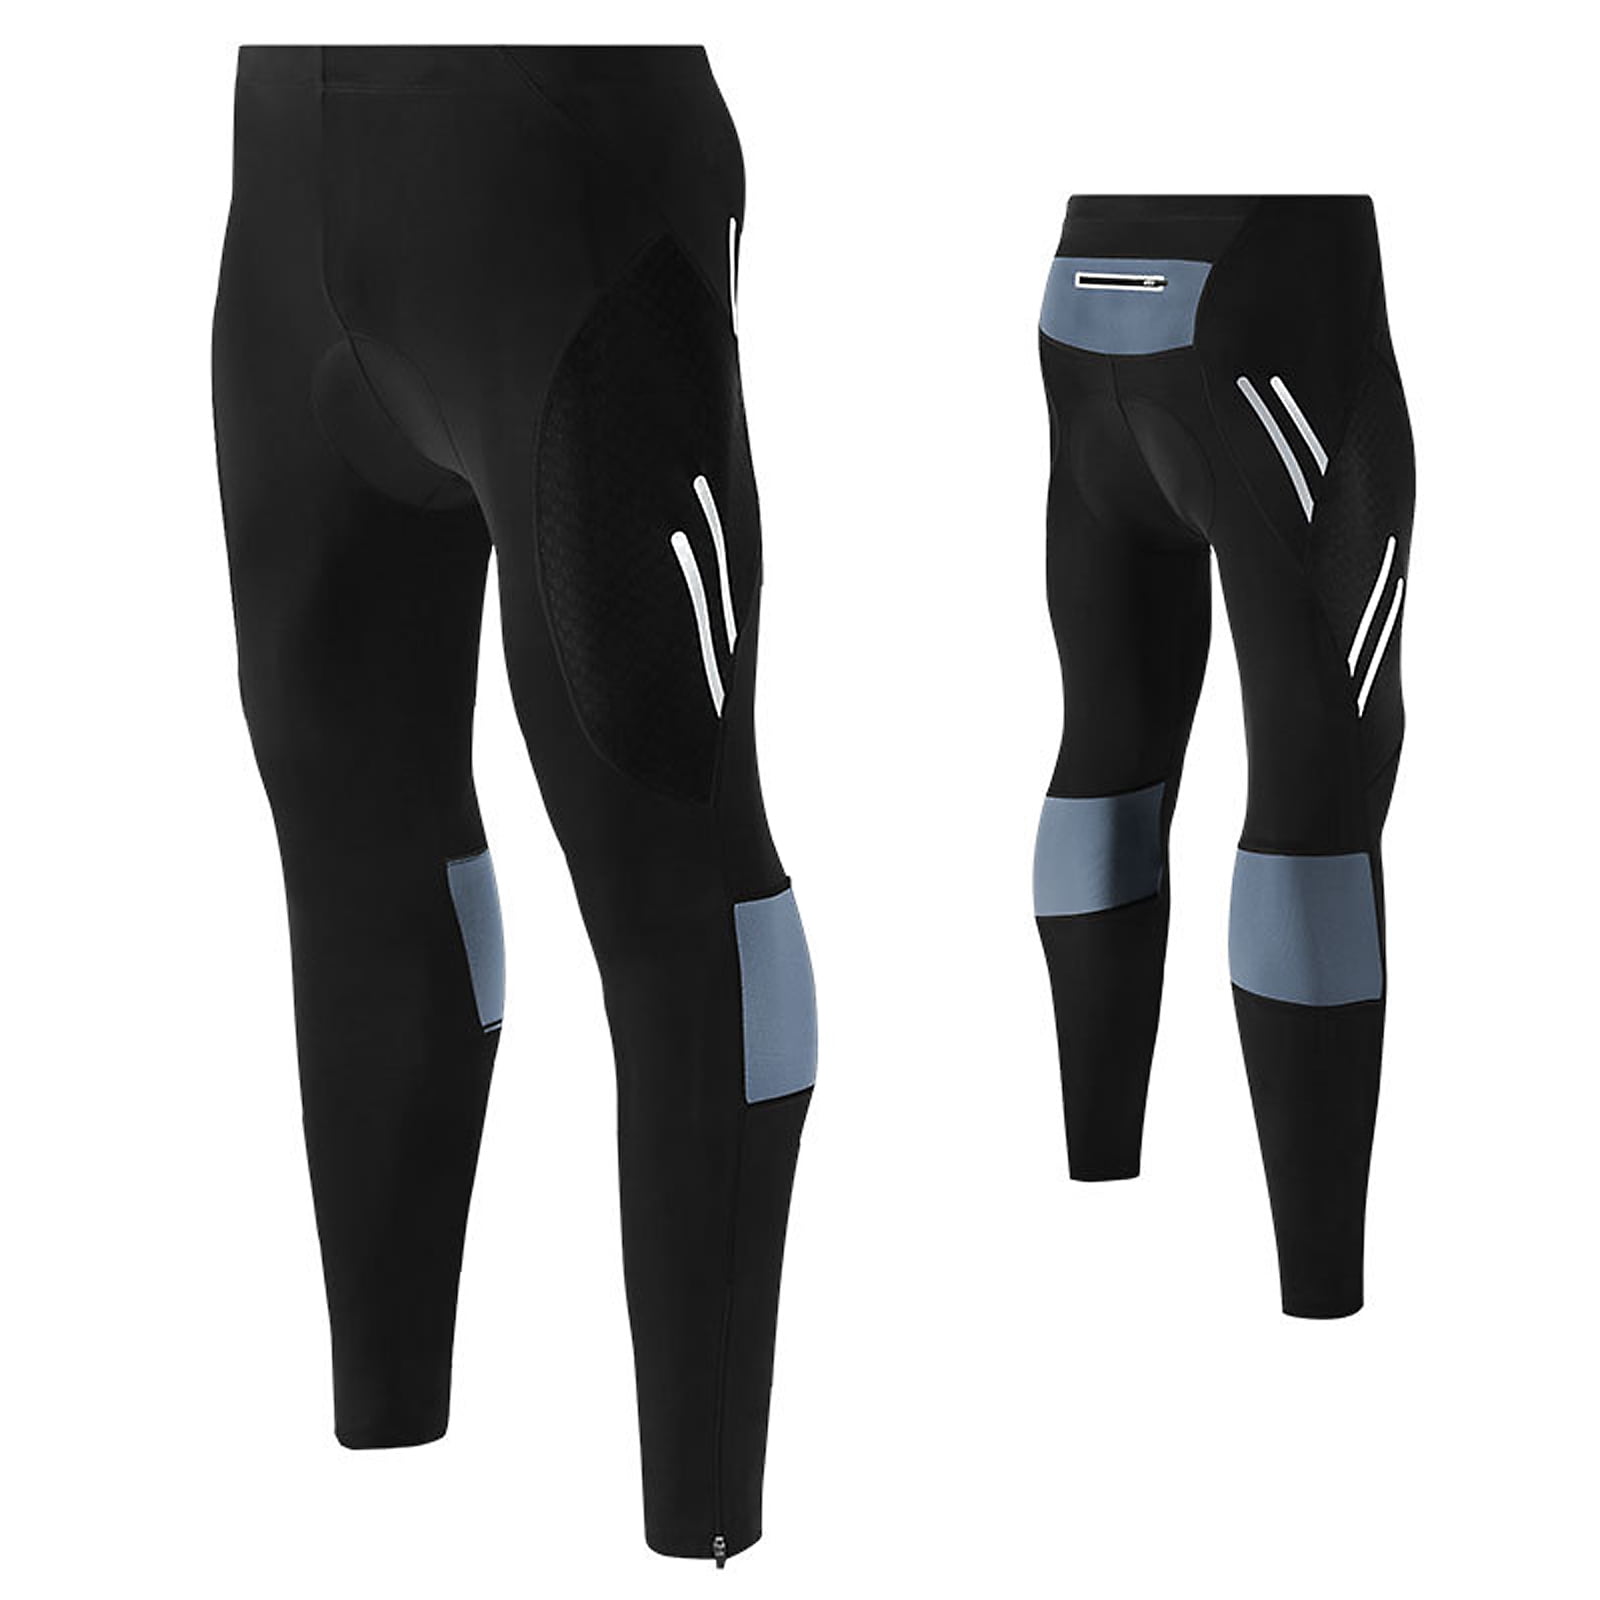 Medium THE II BRO Compression Men's Reflective Running Pants with Pockets 